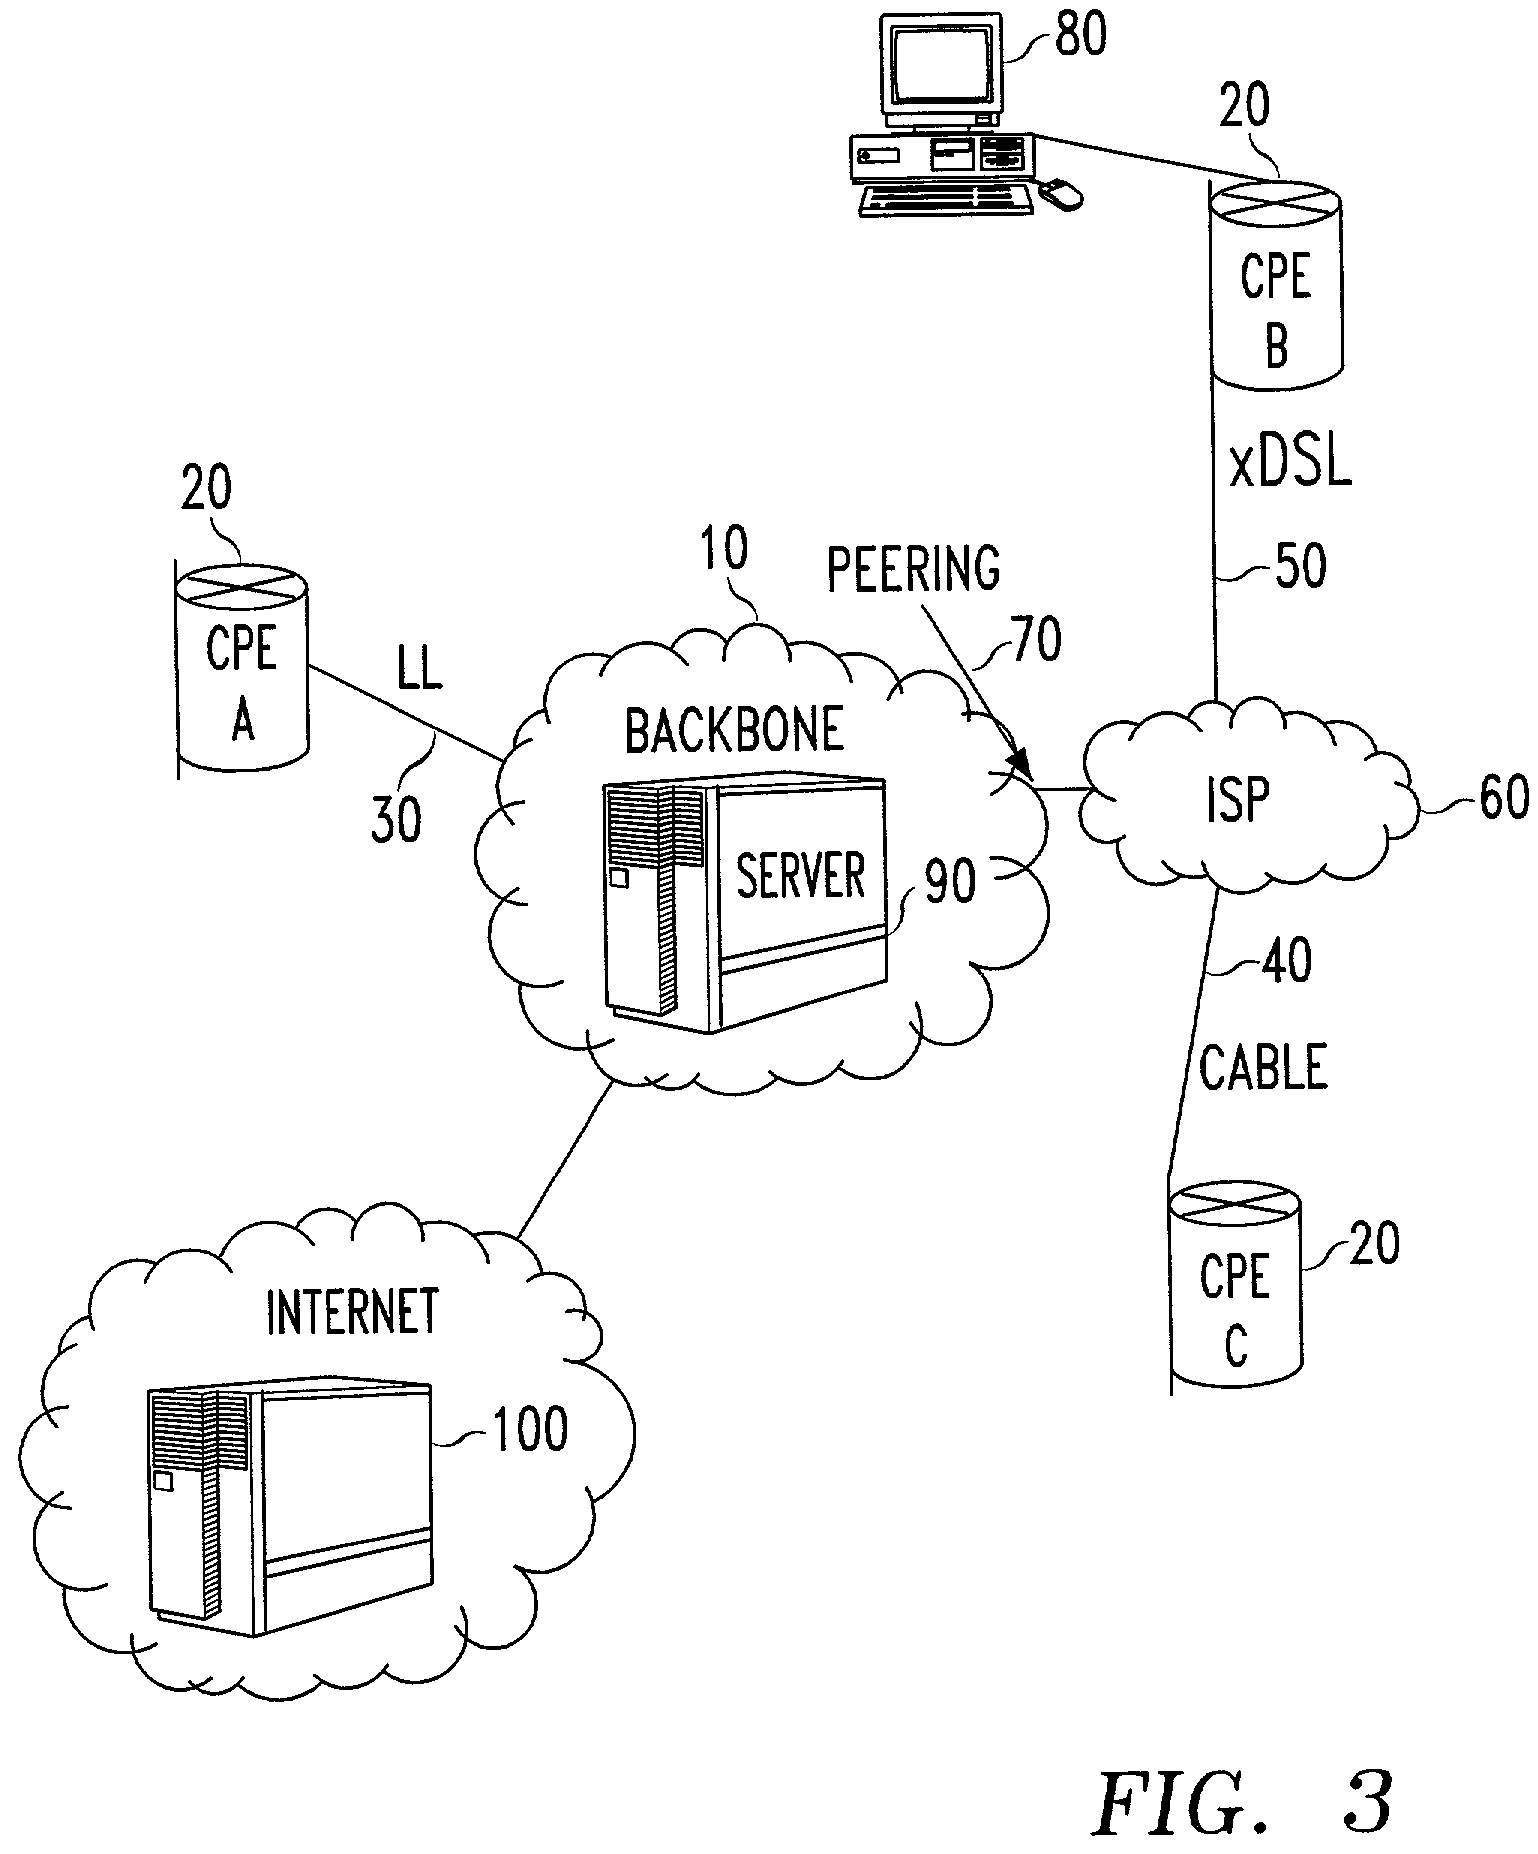 Methods for optimizing and evaluating network access techniques